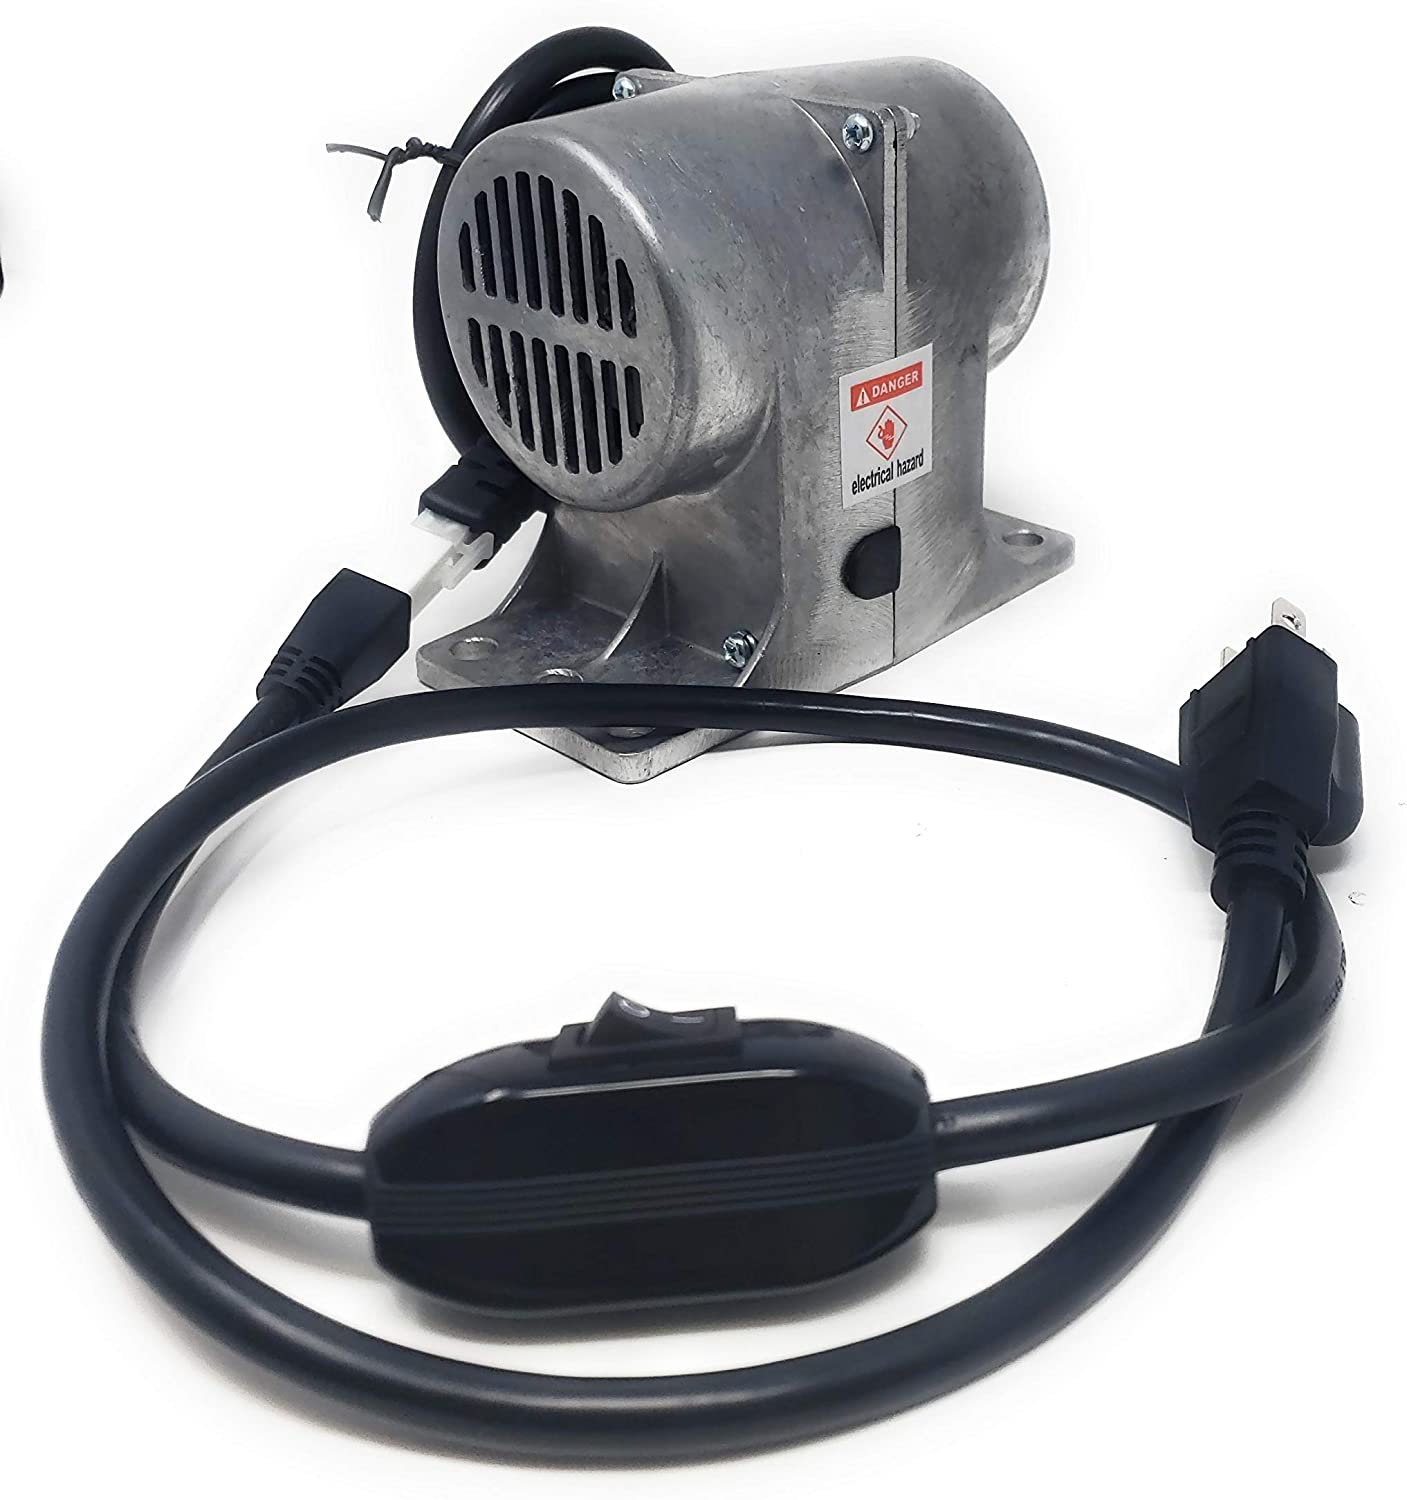 120V Vibrating Massage Motor for Bed, Table, or Chair (with Cord)